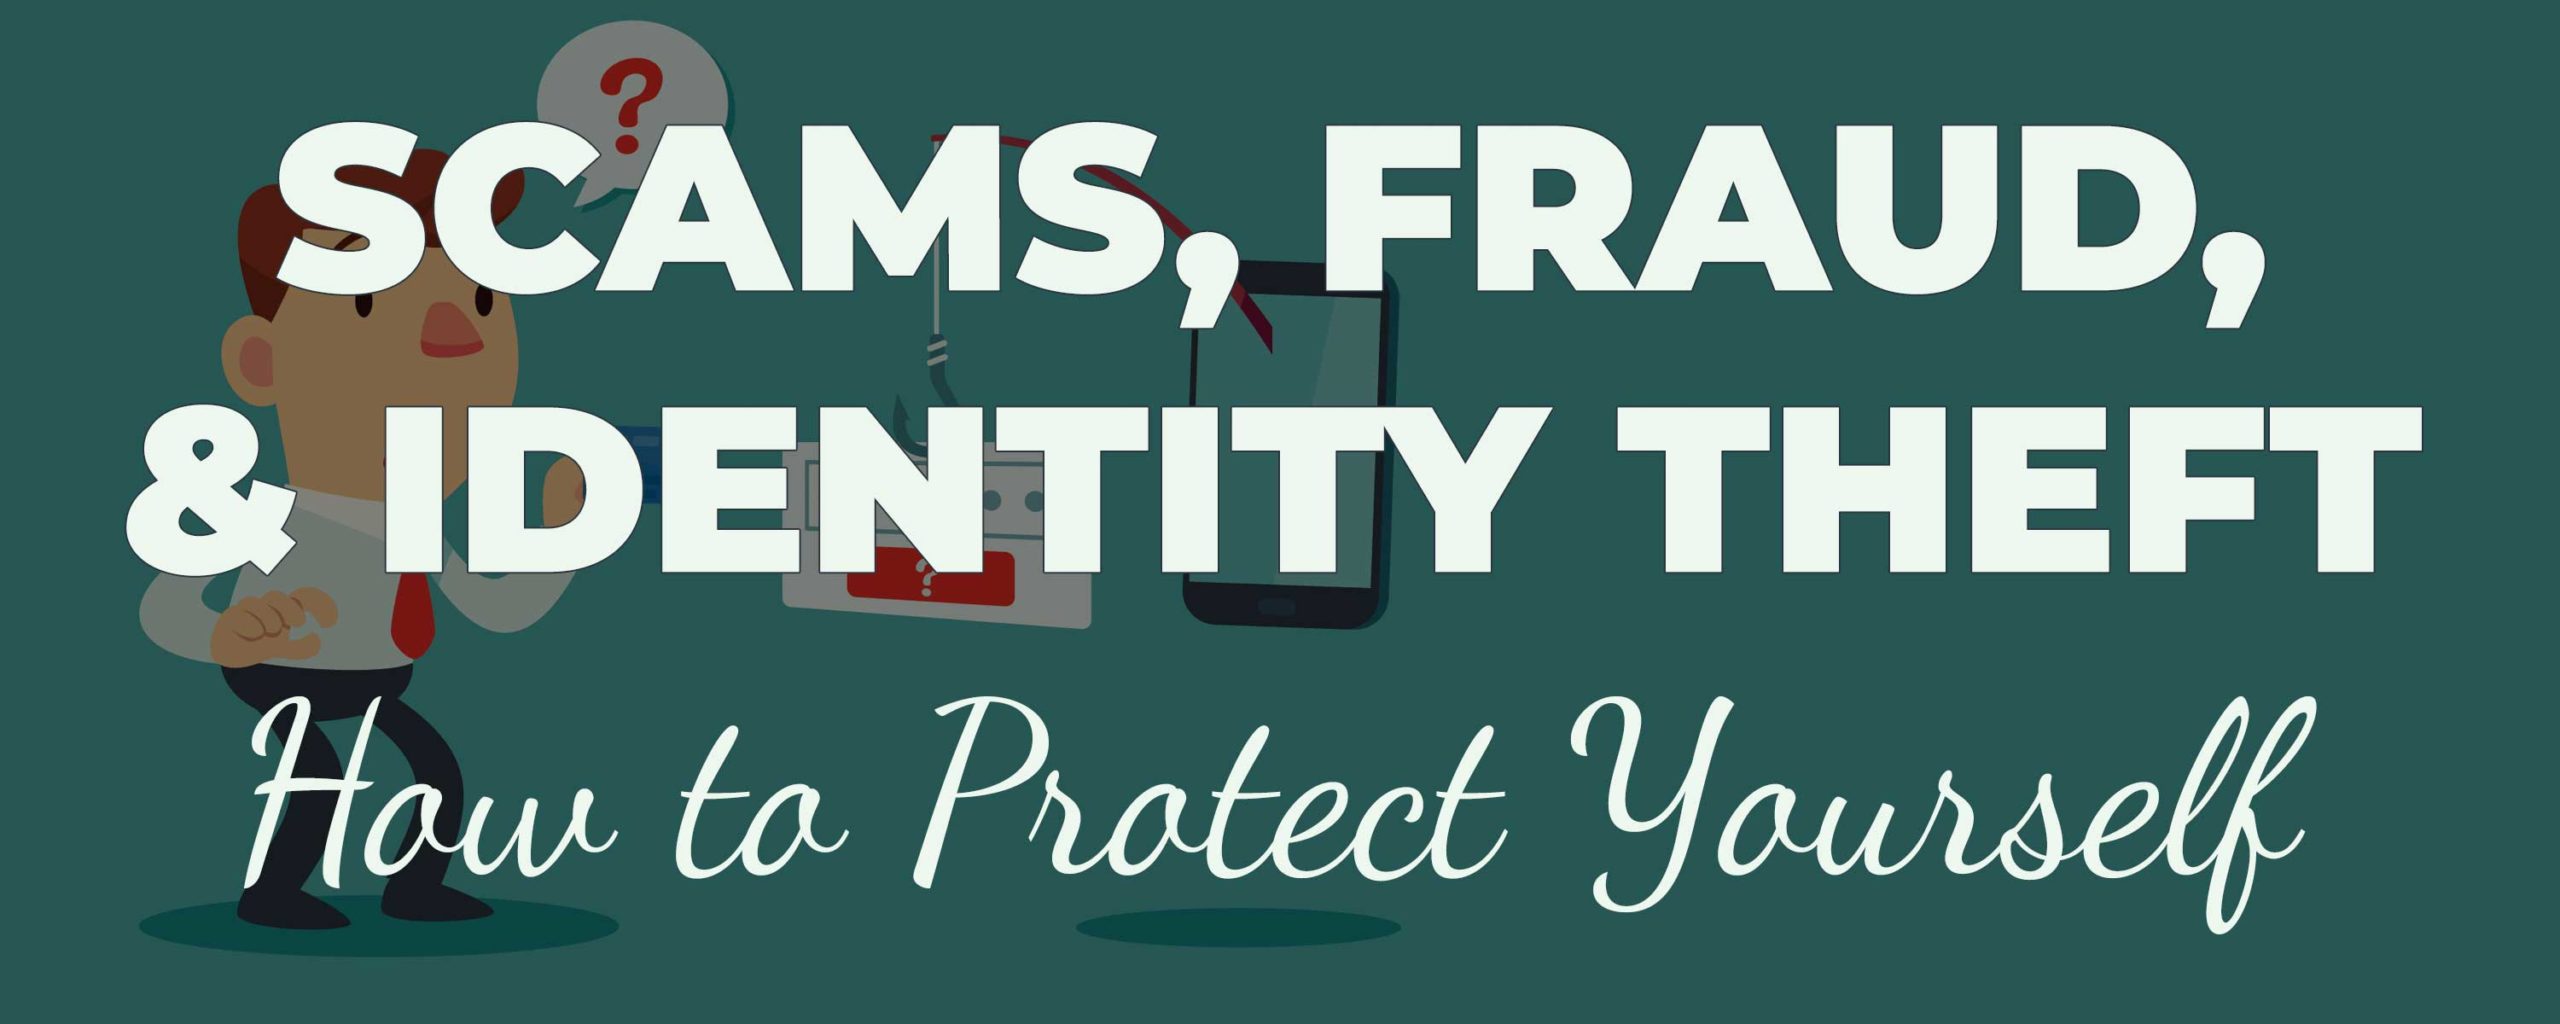 Scams, Fraud, and Identity Theft: How to Protect Yourself - Kirtland ...